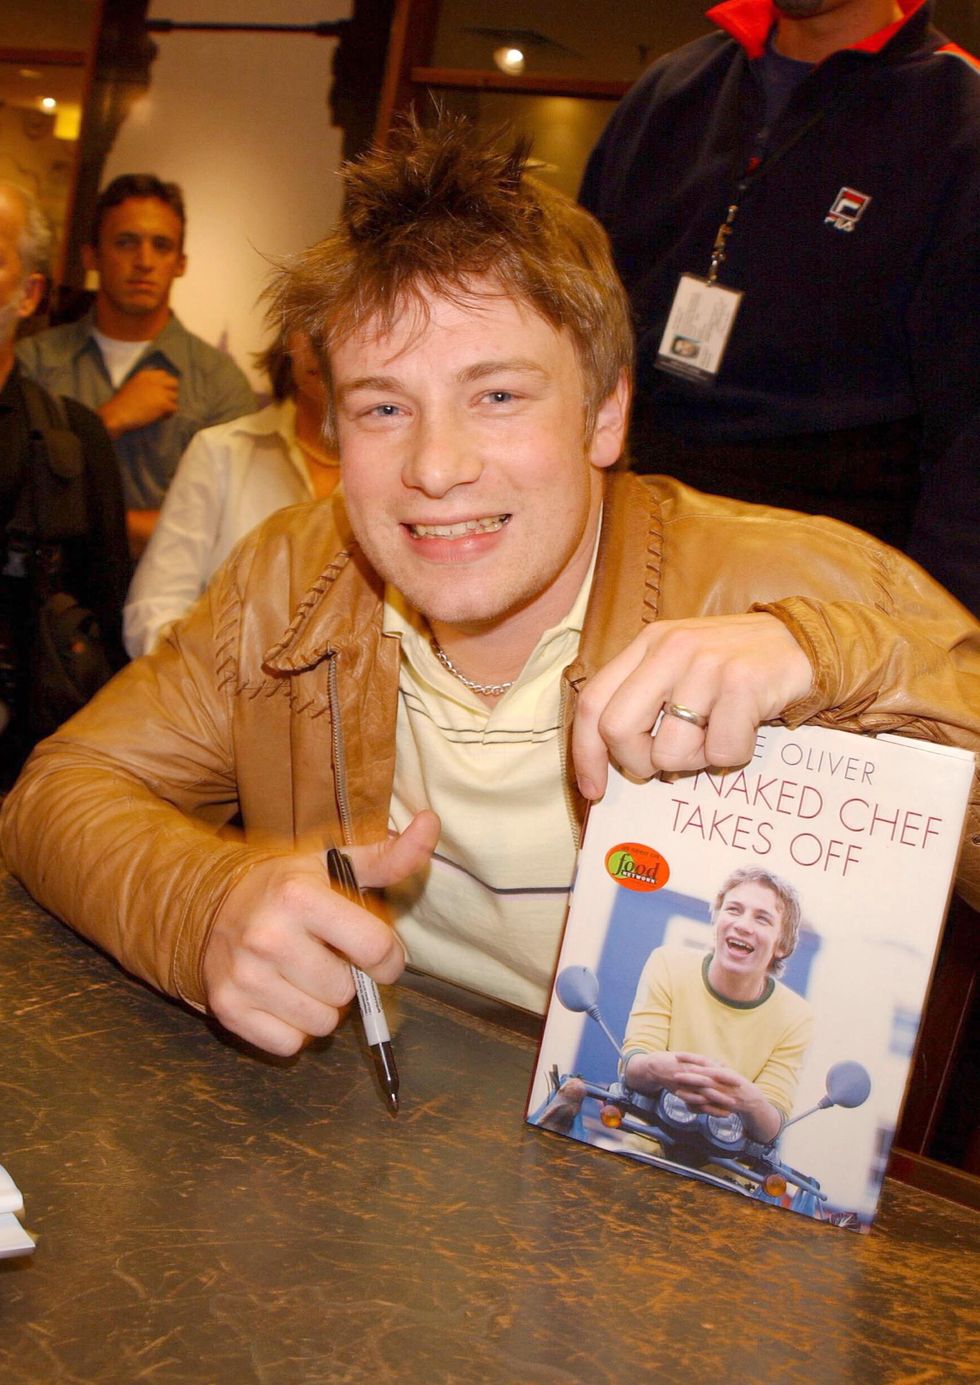 Jamie Oliver, The Naked Chef at his Book Launch